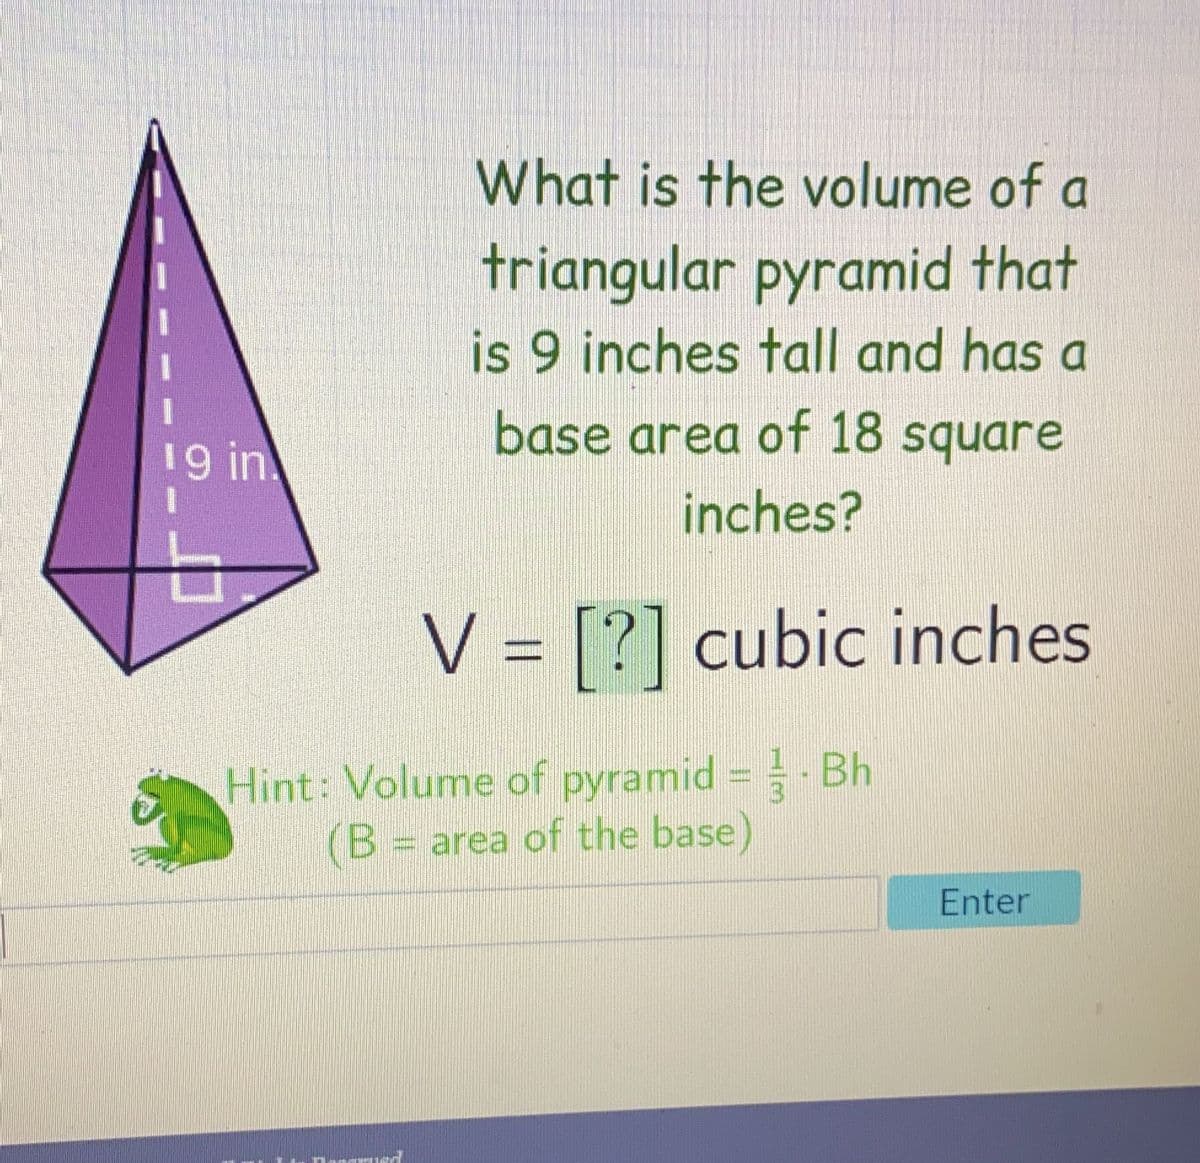 19 in.
What is the volume of a
triangular pyramid that
is 9 inches tall and has a
base area of 18 square
inches?
V = [?] cubic inches
Hint: Volume of pyramid = Bh
(B = area of the base)
Enter